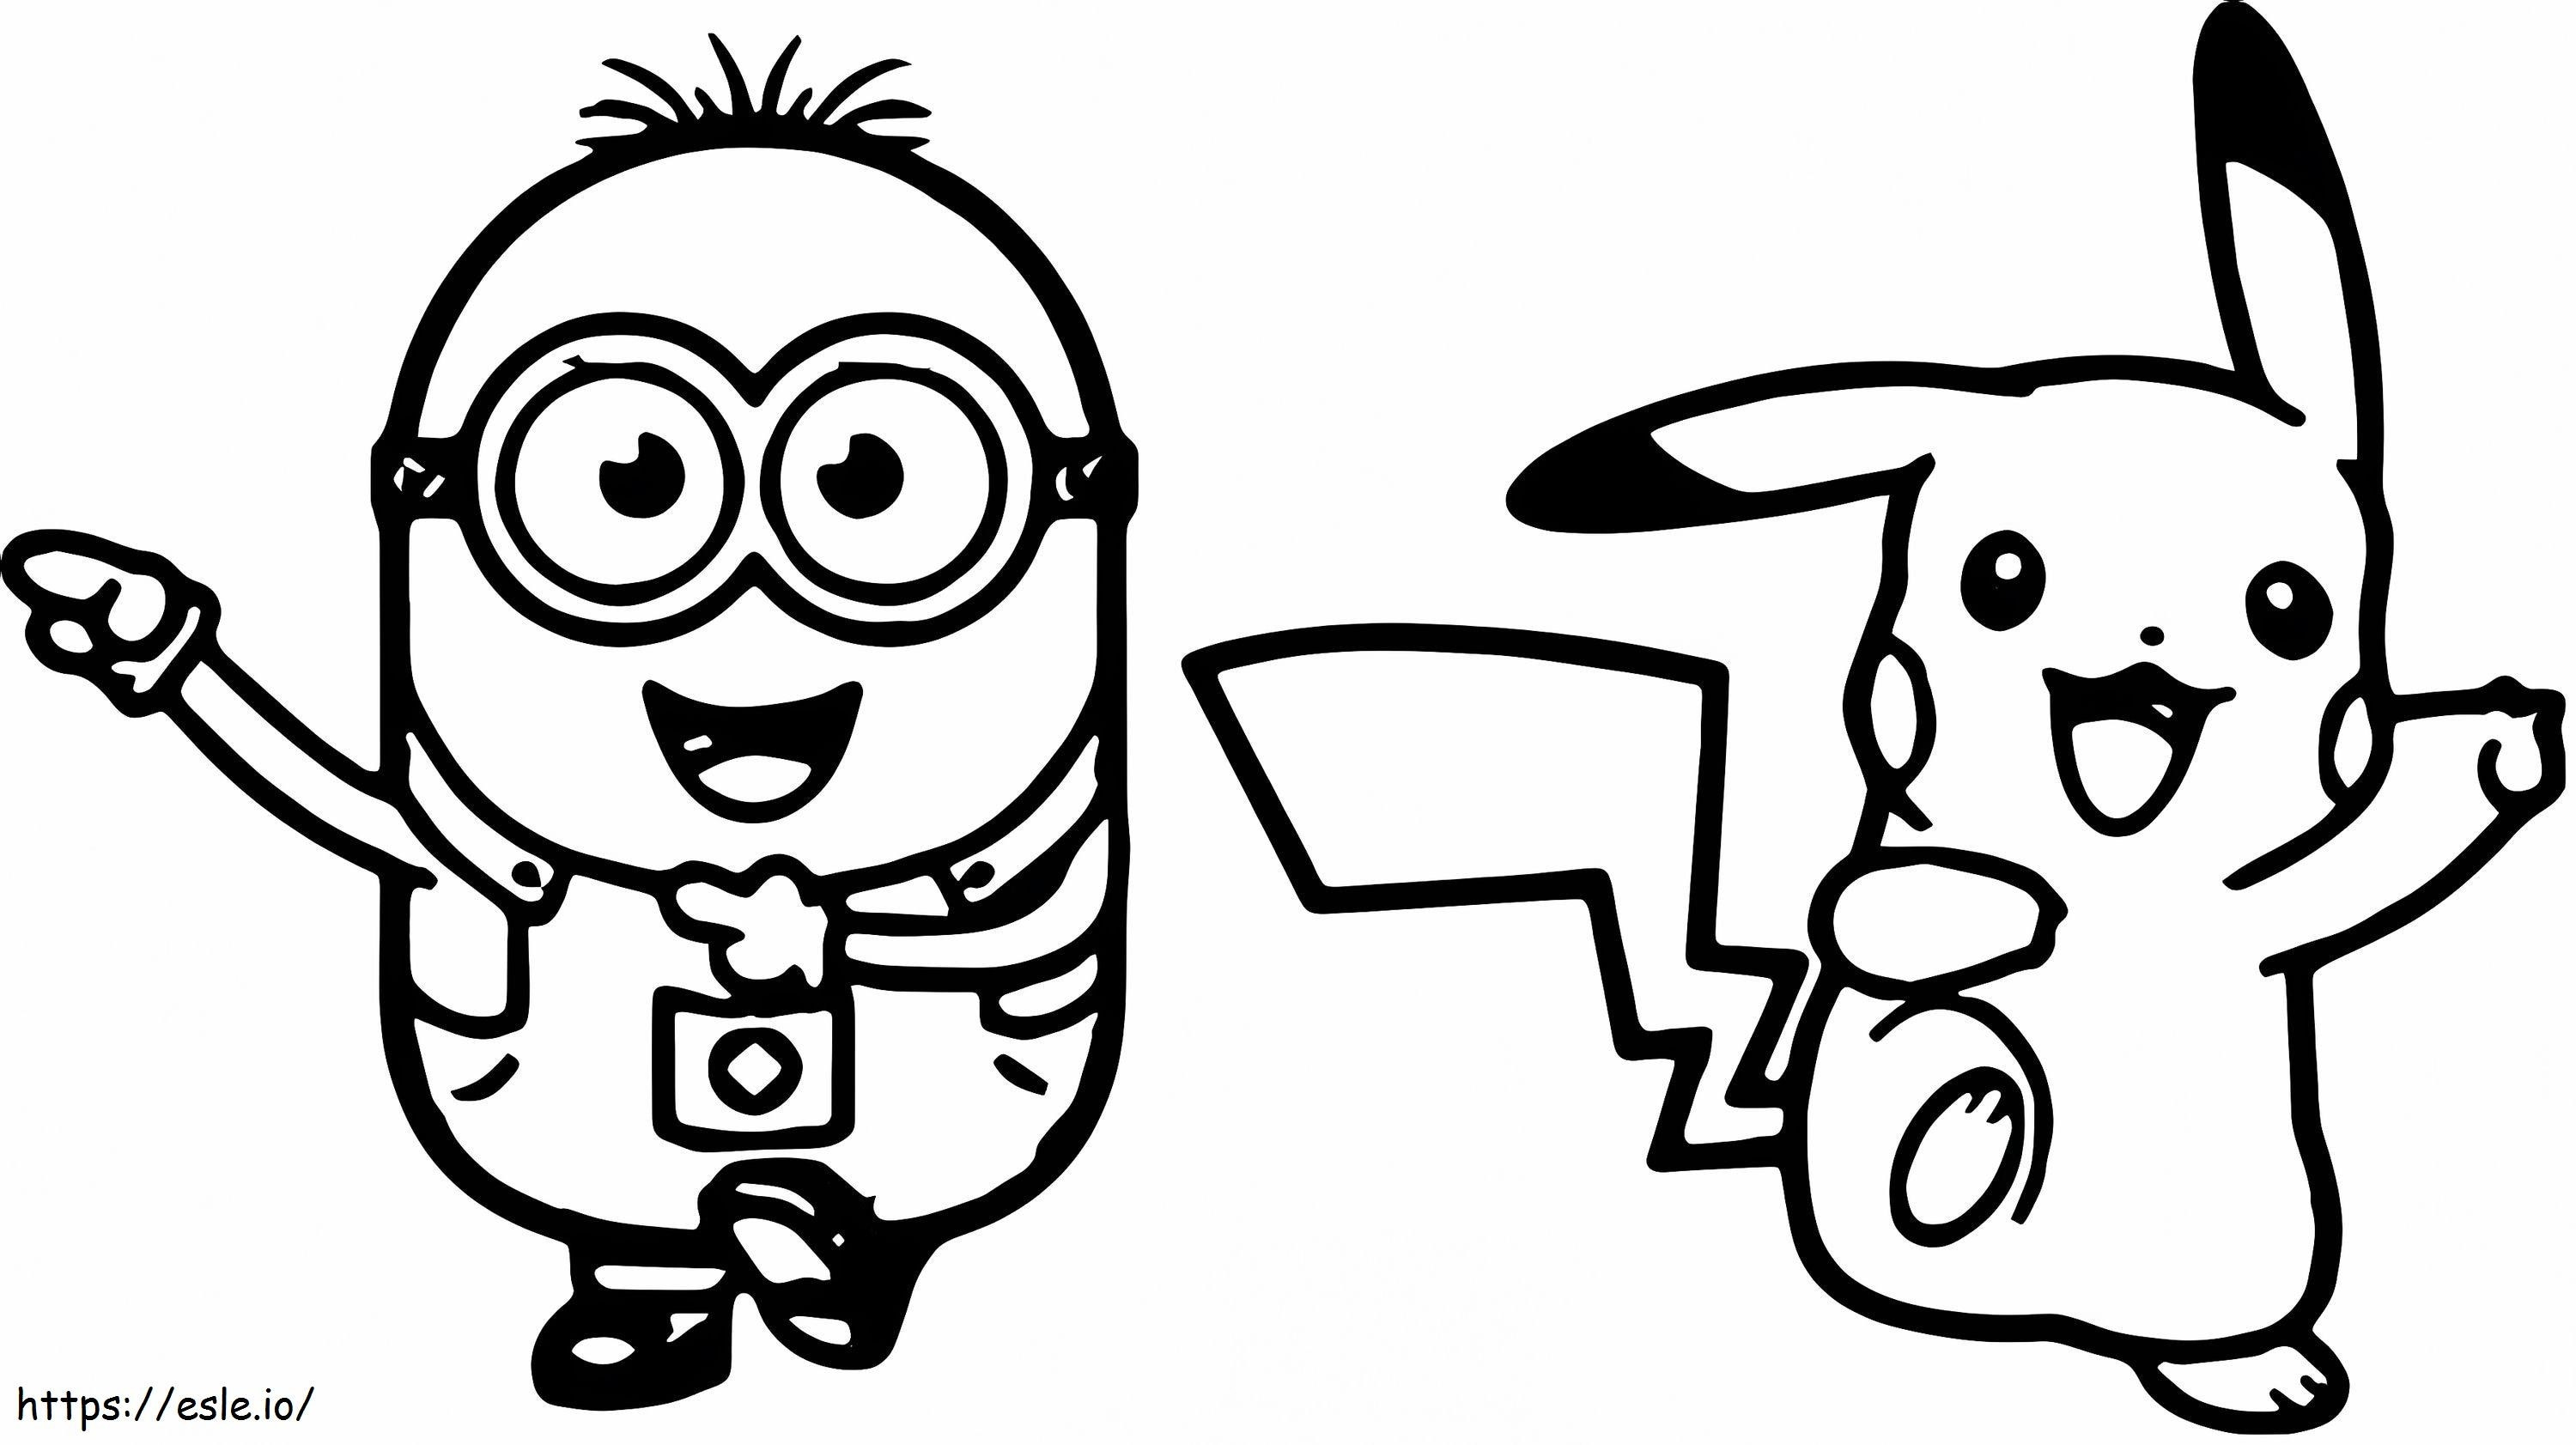 1532138270 Minion And Pikachu Dancing A4 E1600349808872 coloring page